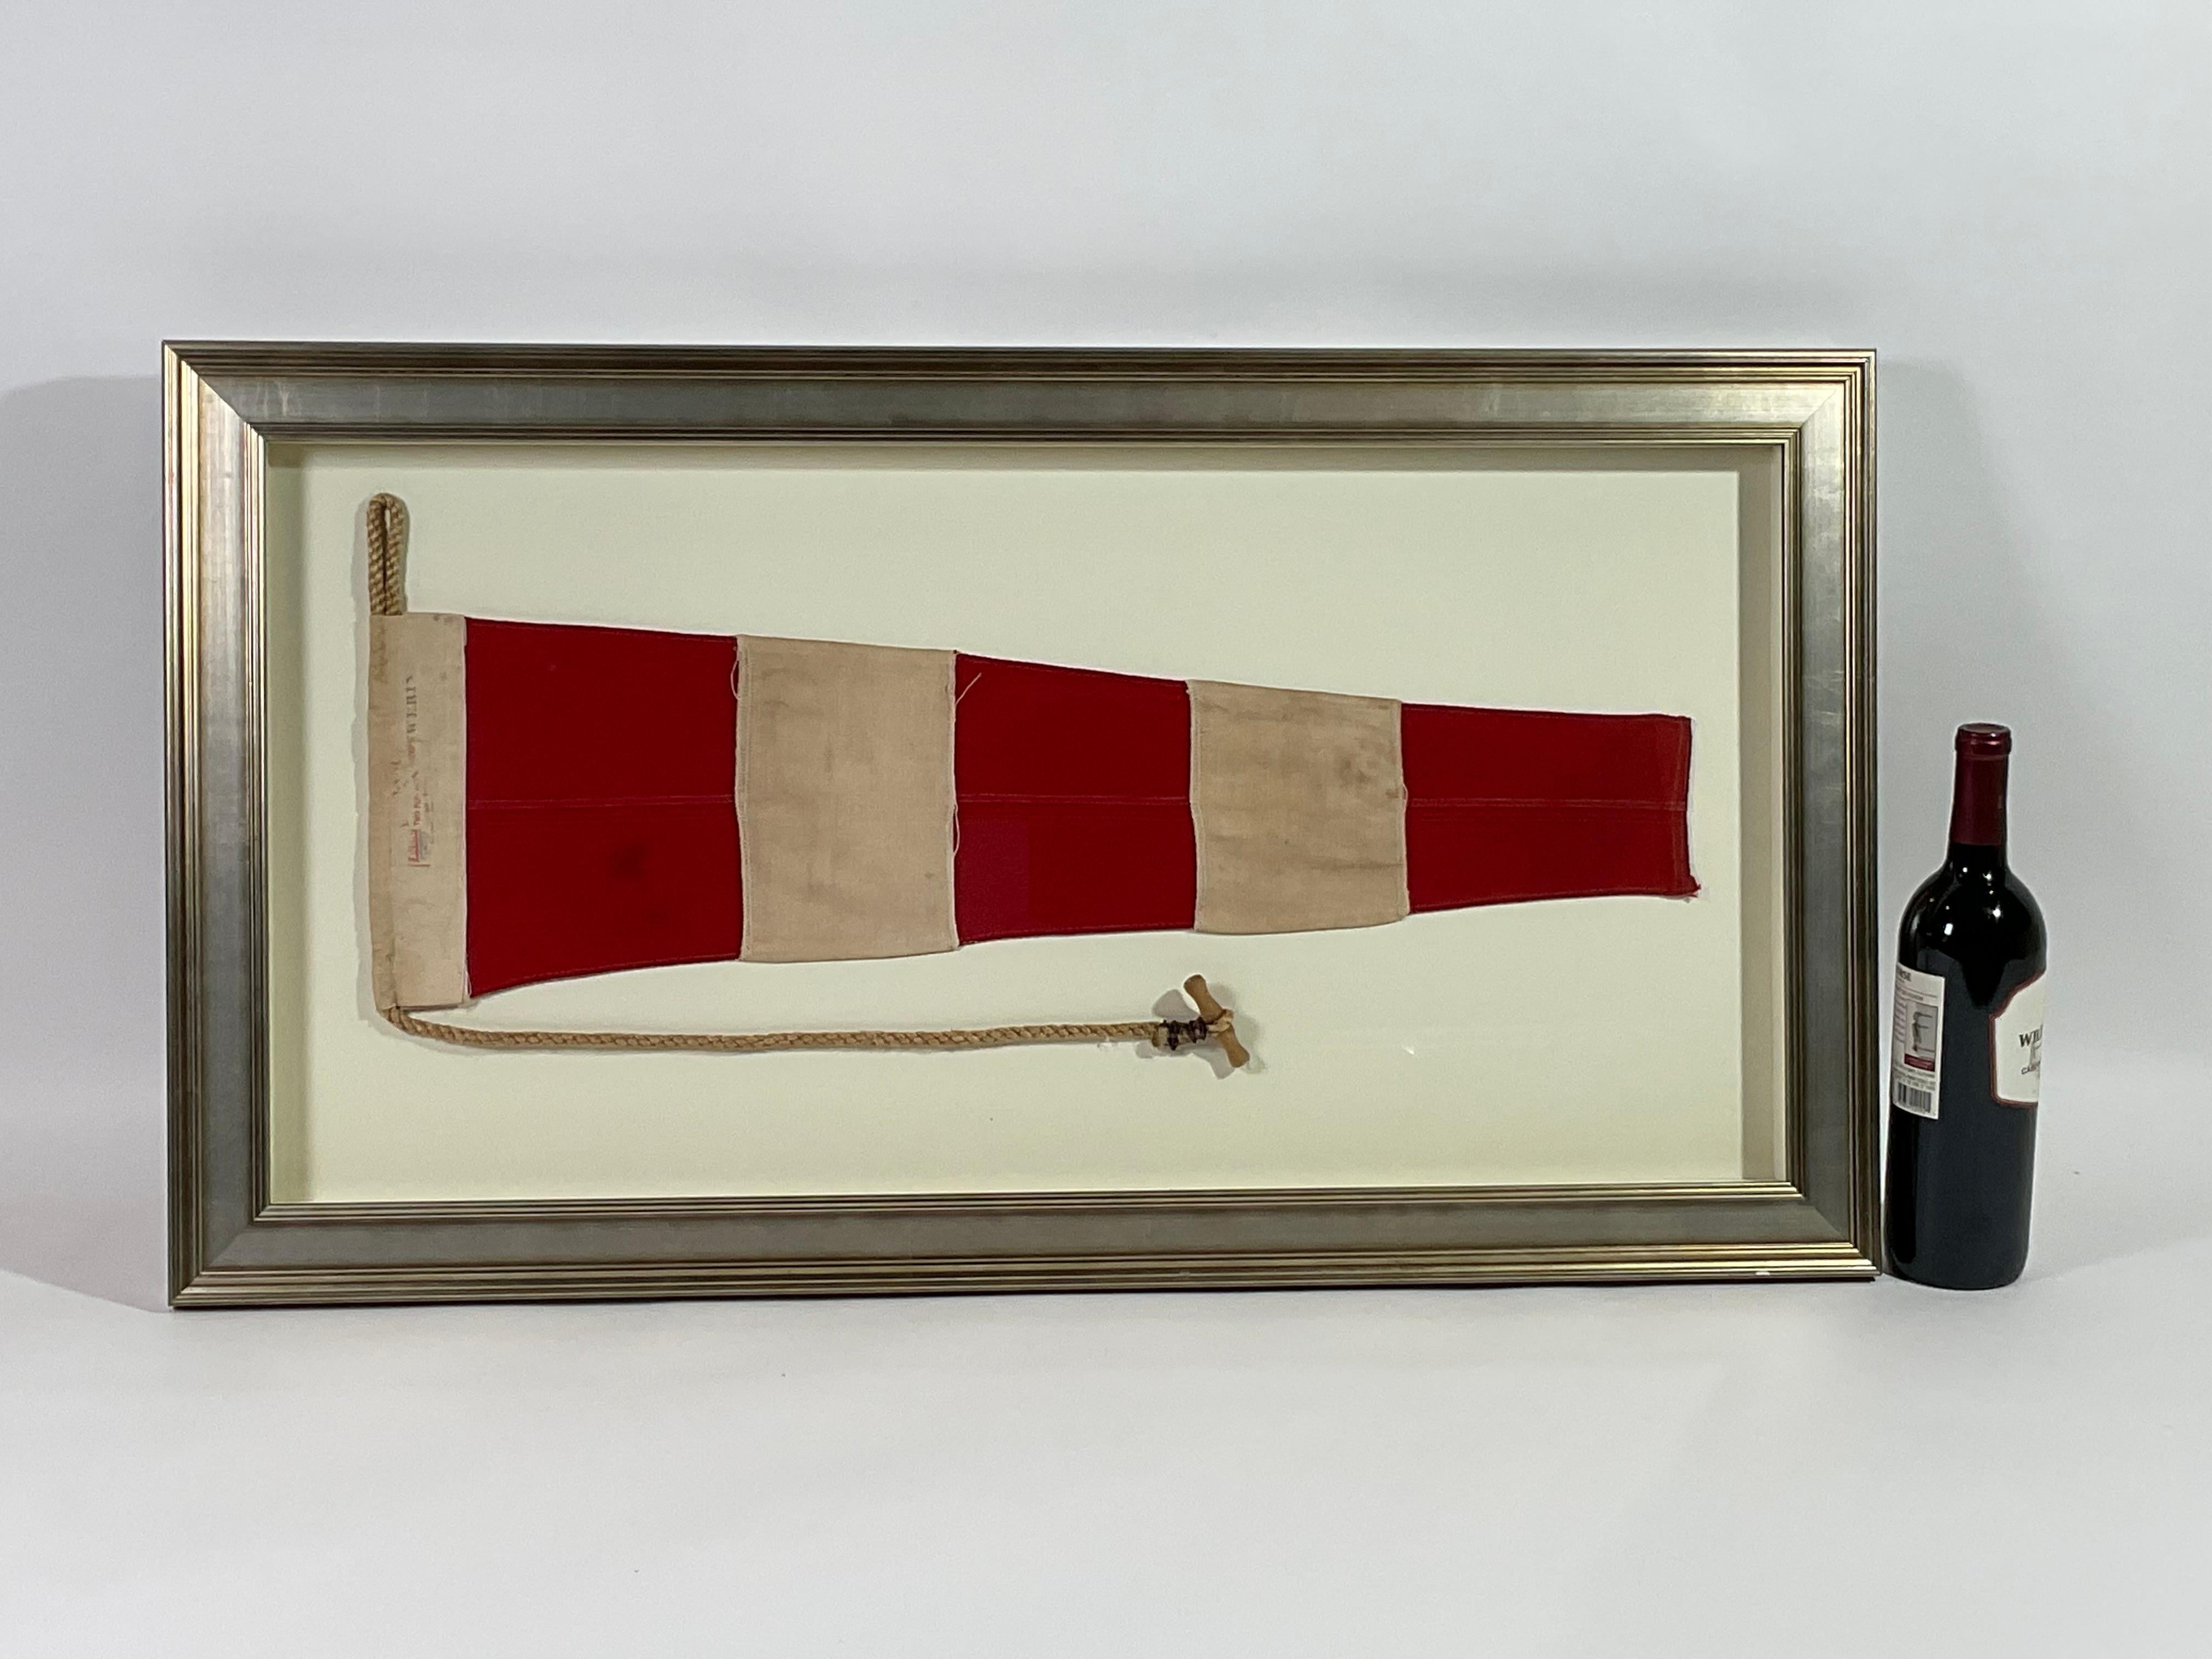 Framed maritime signal flag representing the “ANSWERING PENNANT” in the international code of signals. This authentic and ocean used pennant is made of individual panels of red and white. Fitted to a heavy canvas hoist band with original rope and